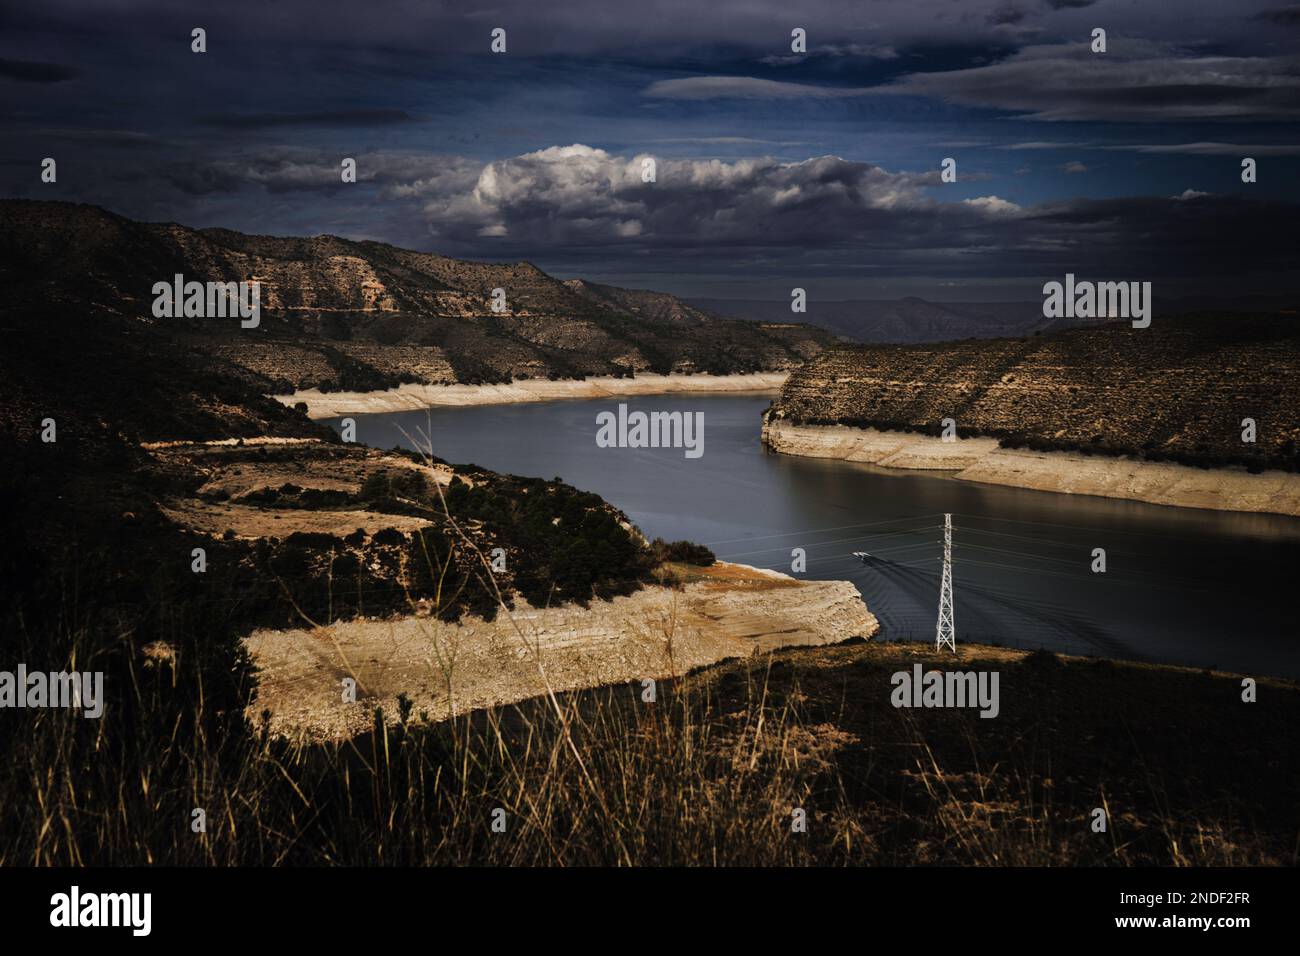 Reservoir of the Ebro in Catalonia, Spain at Mequinenza Stock Photo